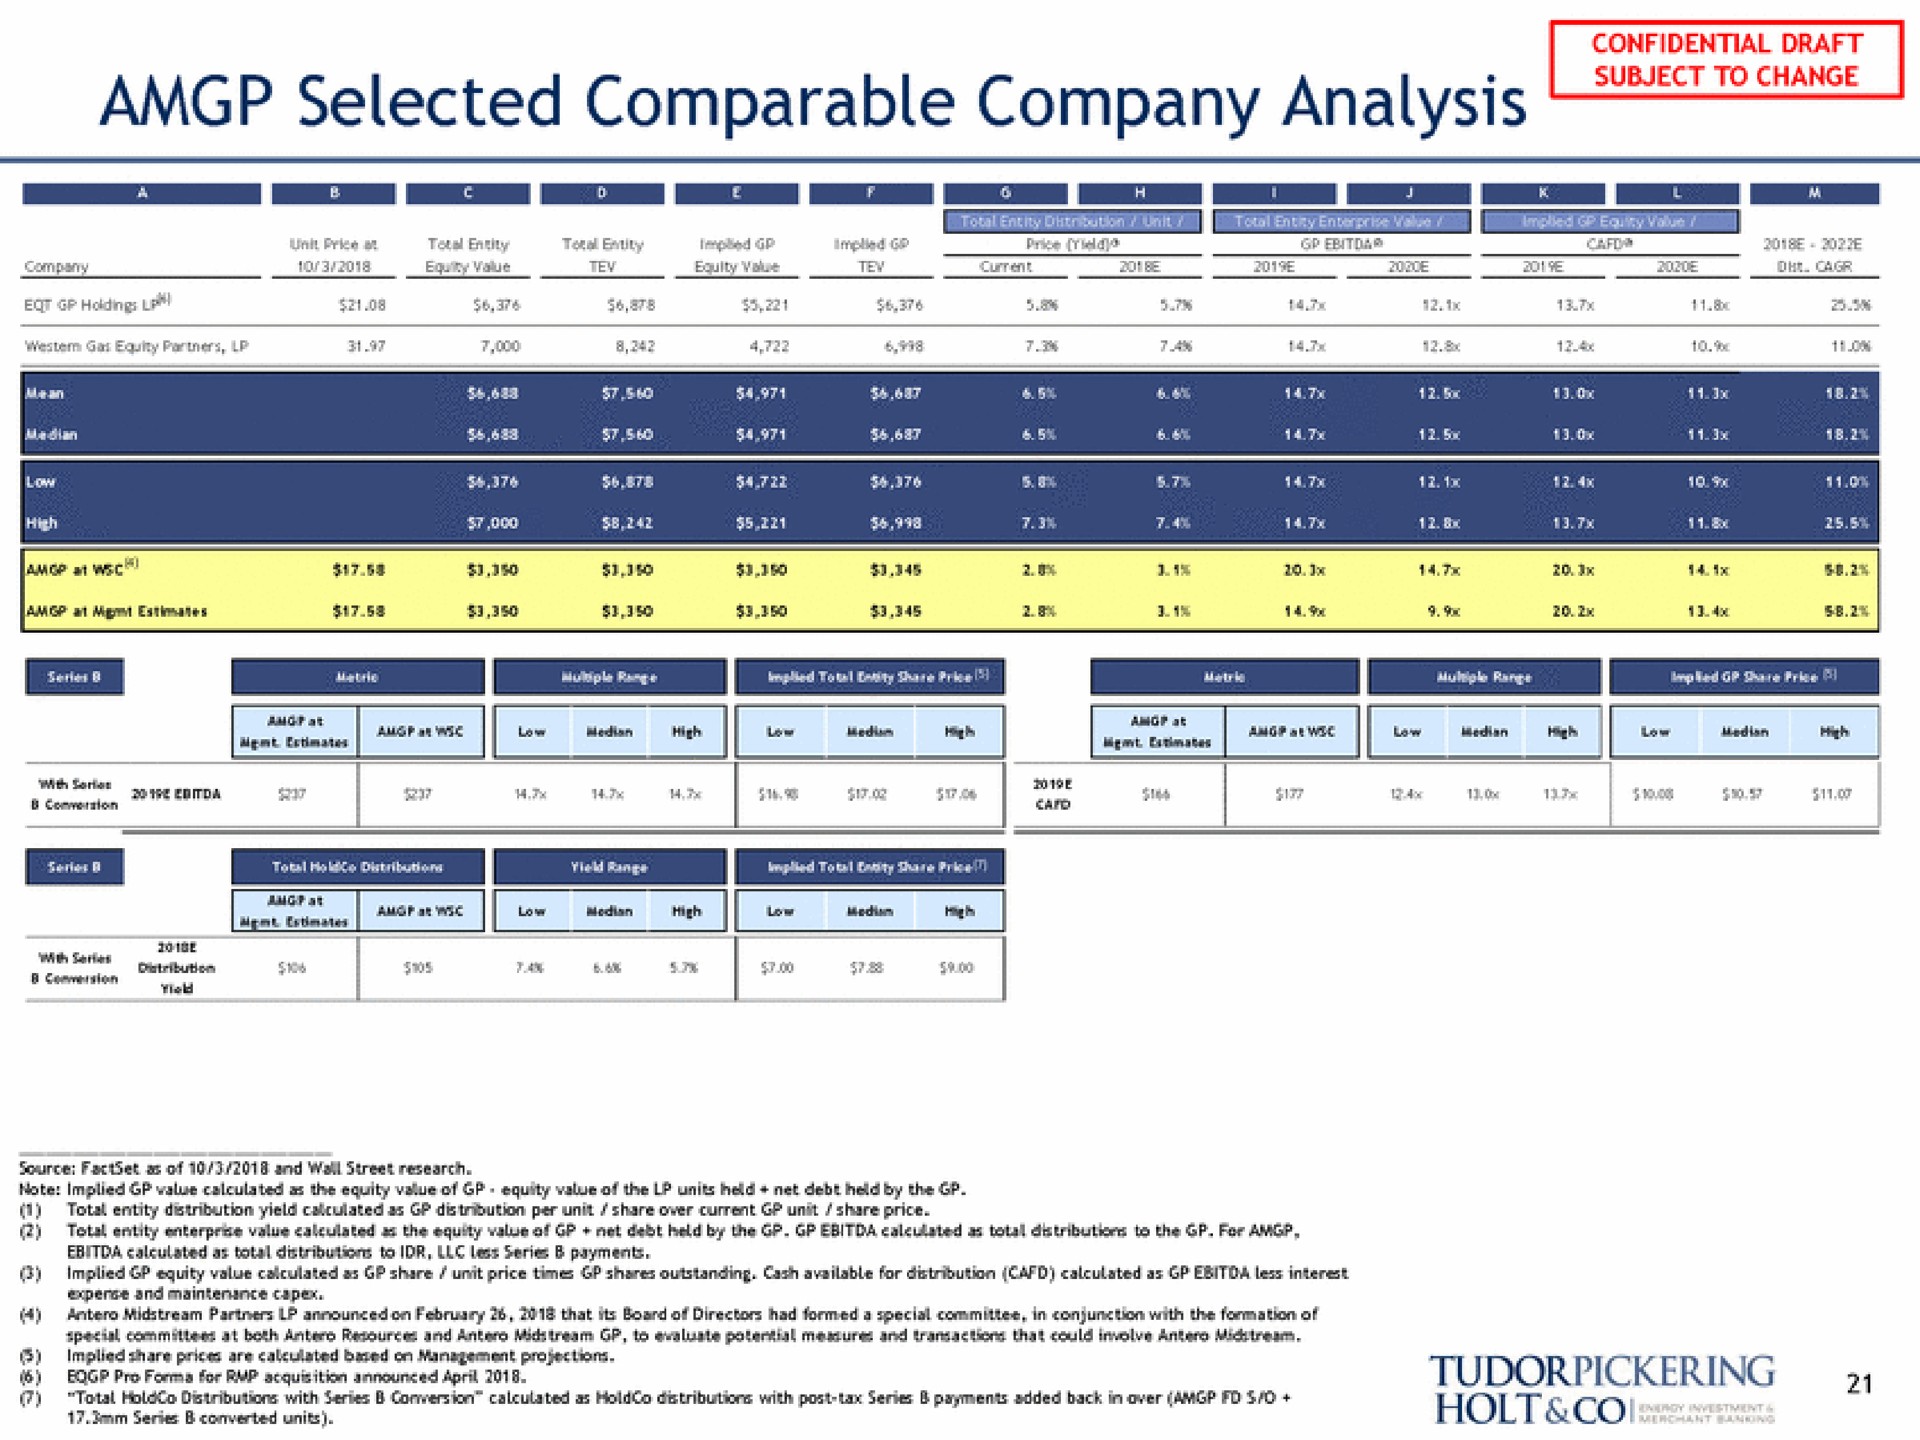 selected comparable company analysis pecan i for acquisition announced a | Tudor, Pickering, Holt & Co